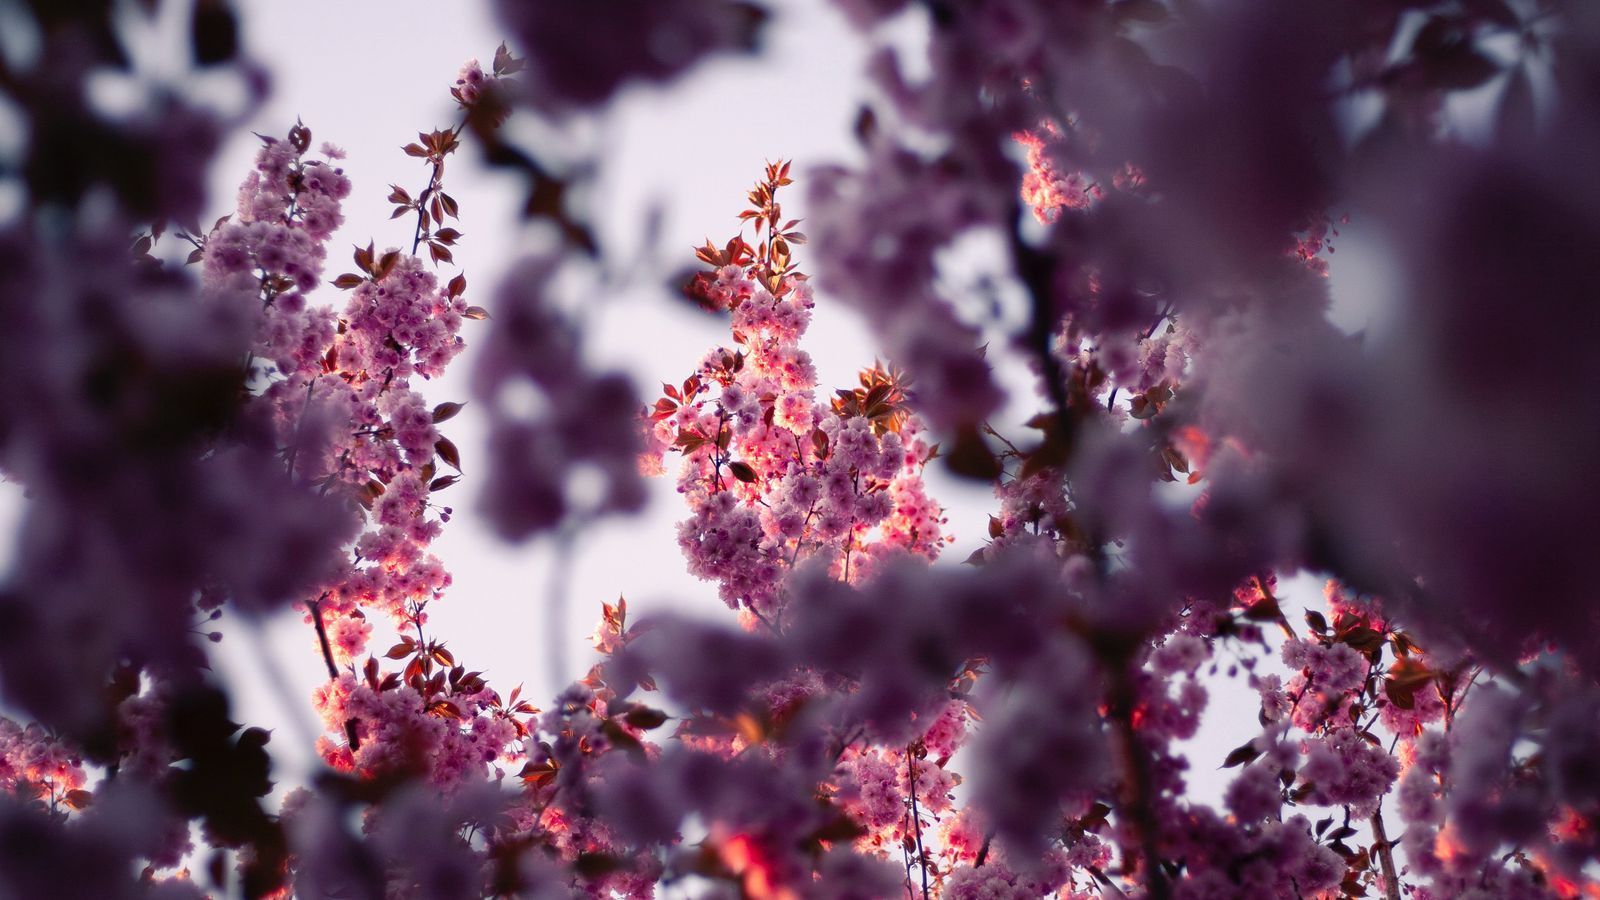 Download wallpaper 1600x900 flowers, branches, pink, tree